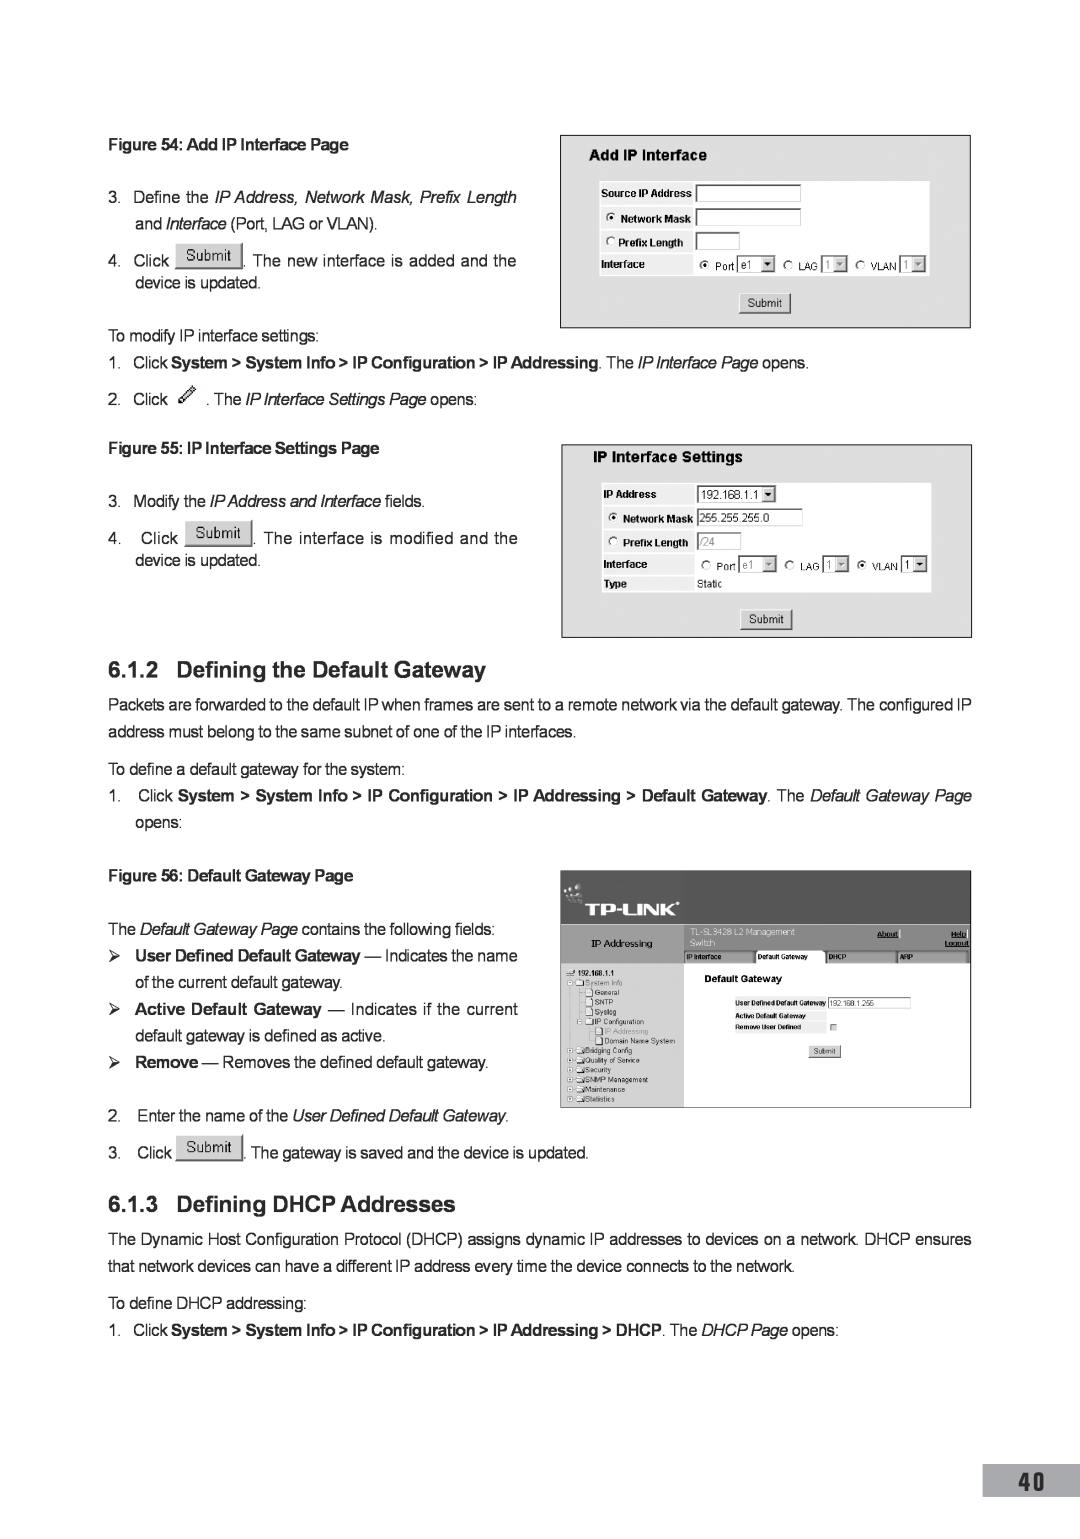 TP-Link TL-SG3109 Defining the Default Gateway, Defining DHCP Addresses, Add IP Interface Page, IP Interface Settings Page 